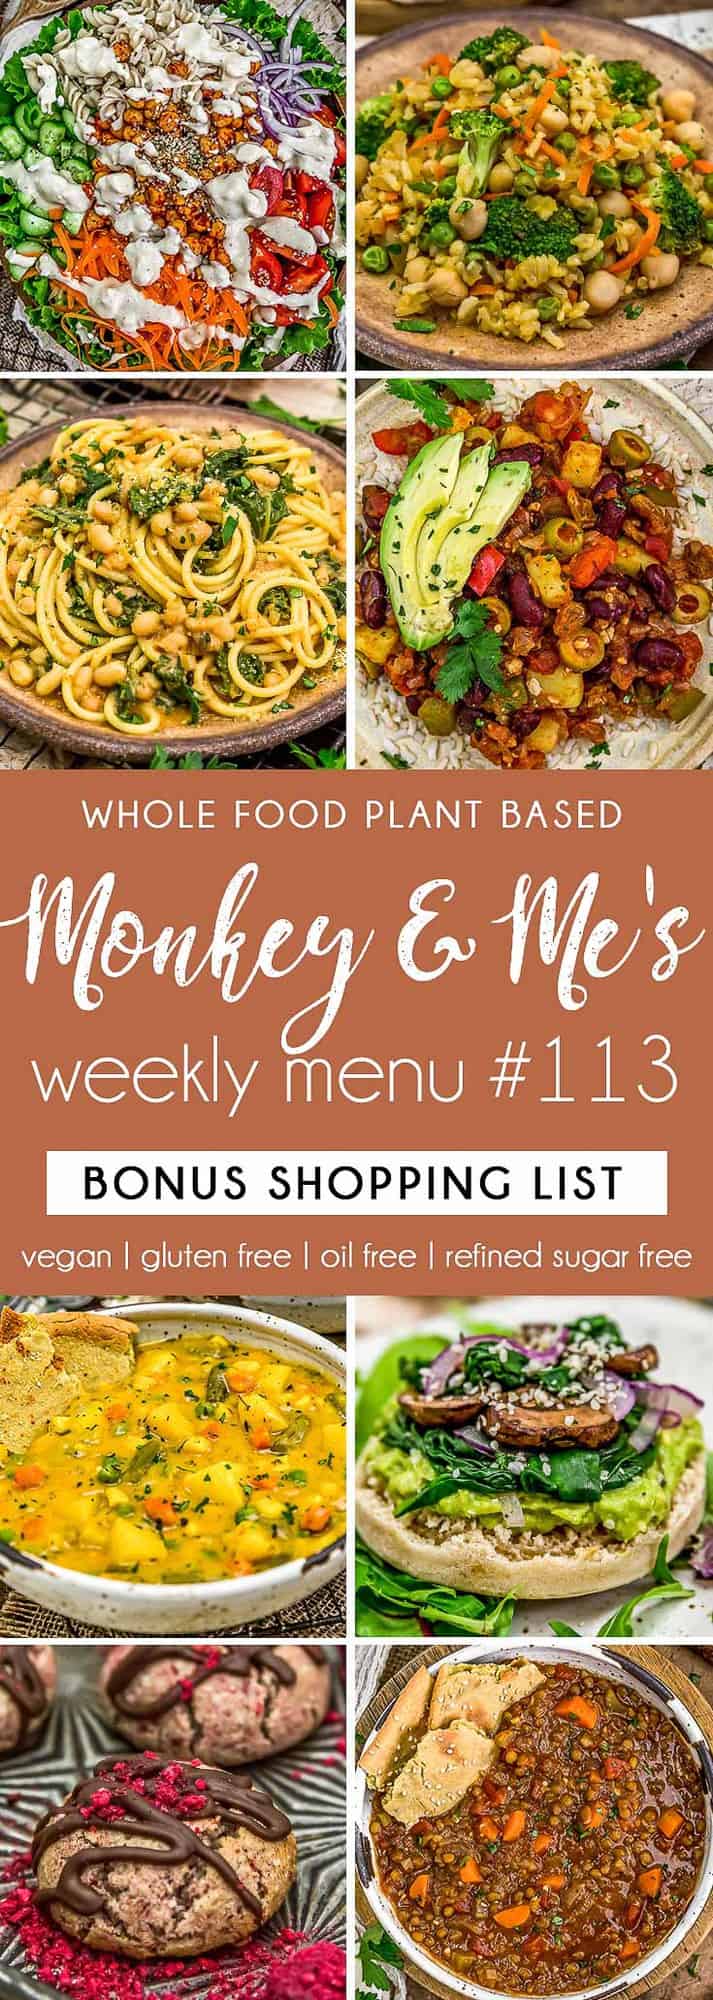 Monkey and Me's Menu 113 featuring 8 recipes